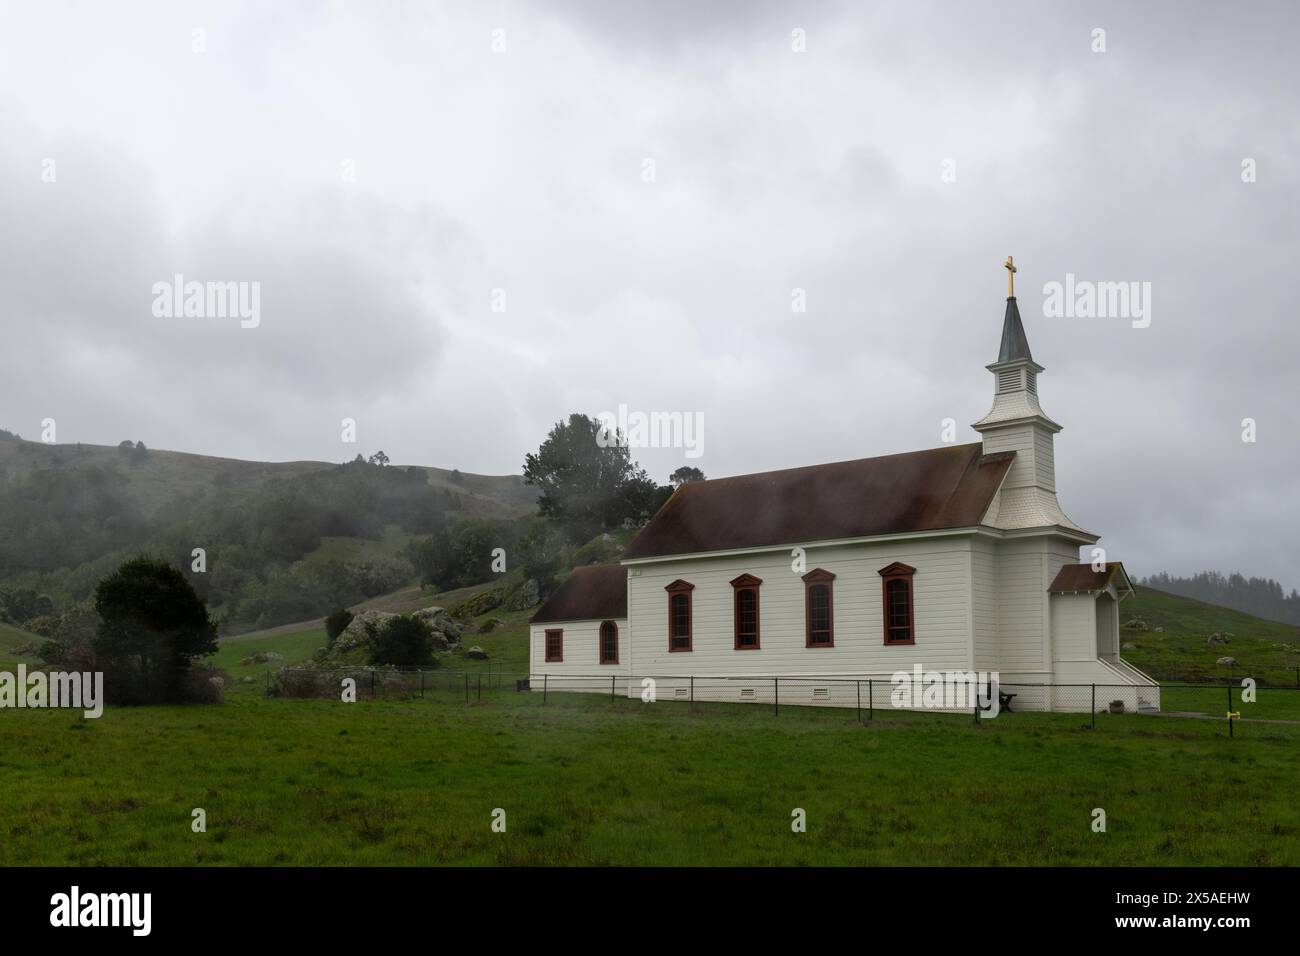 Quaint, rural Old Saint Mary's Church of Nicasio Valley in Marin County, California. Stock Photo